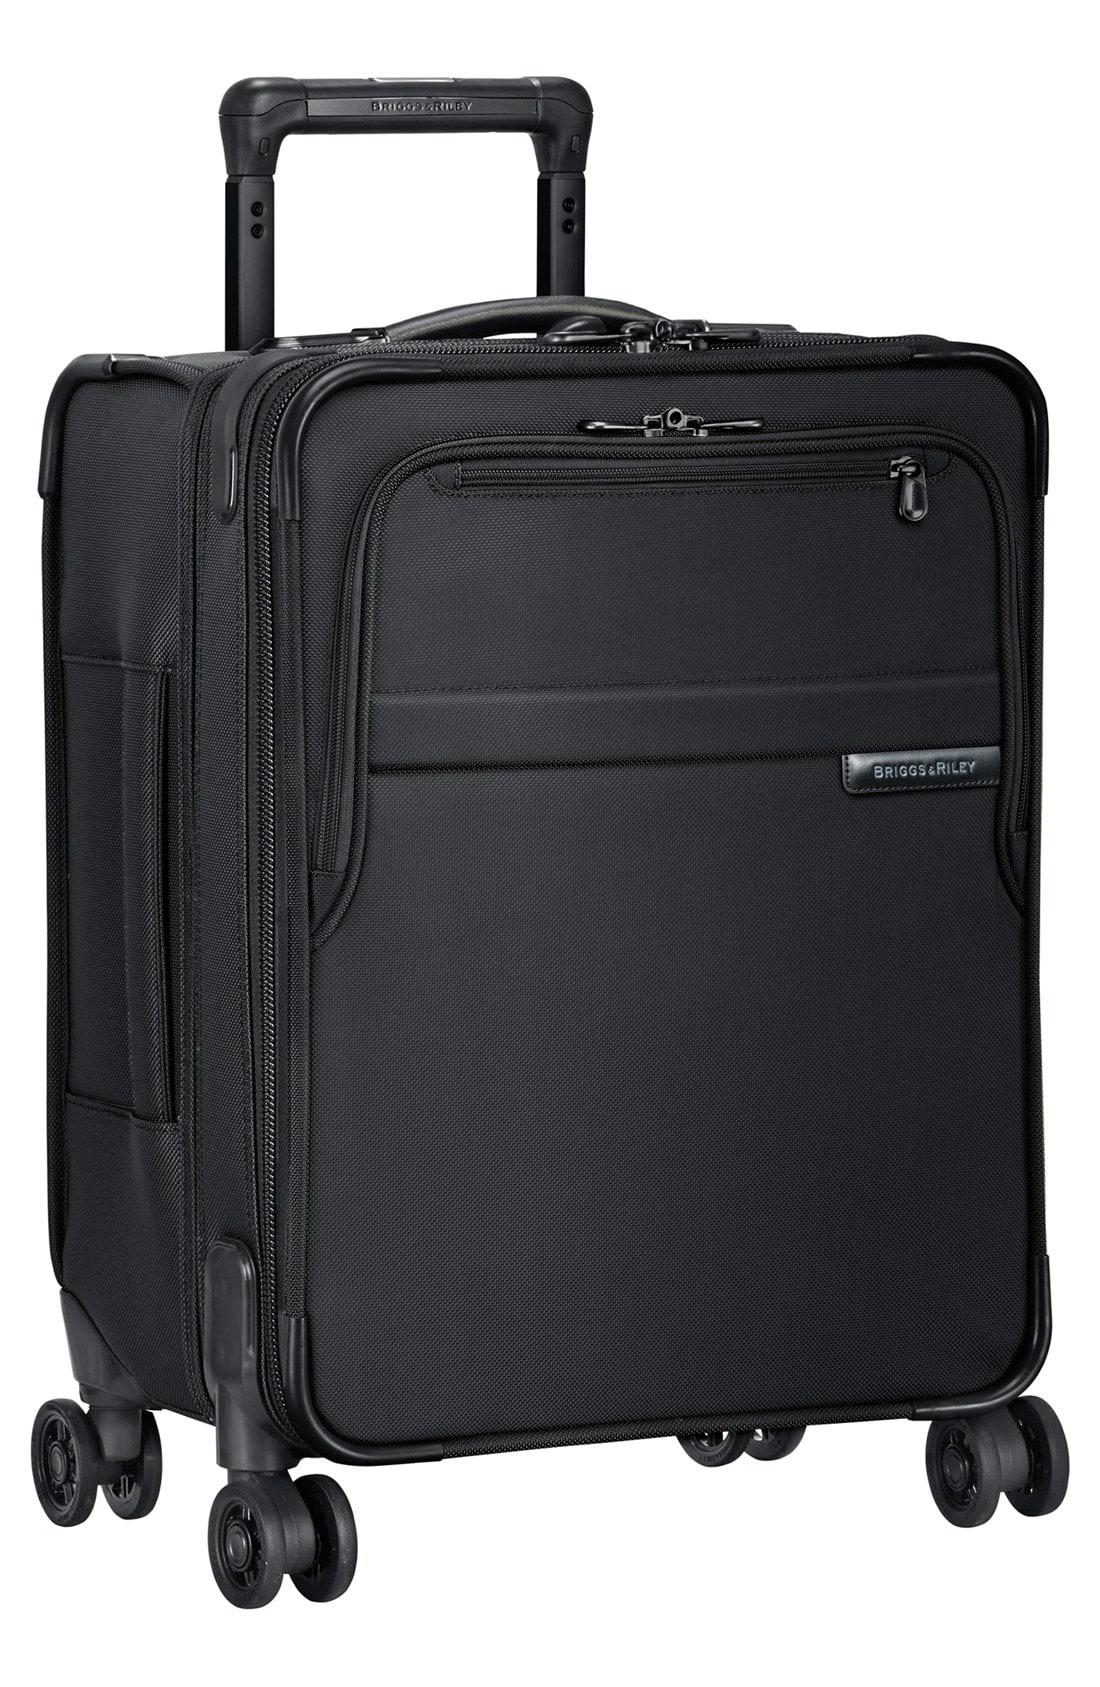 Lyst - Briggs & Riley 'baseline - Commuter' Expandable Rolling Carry-on ...